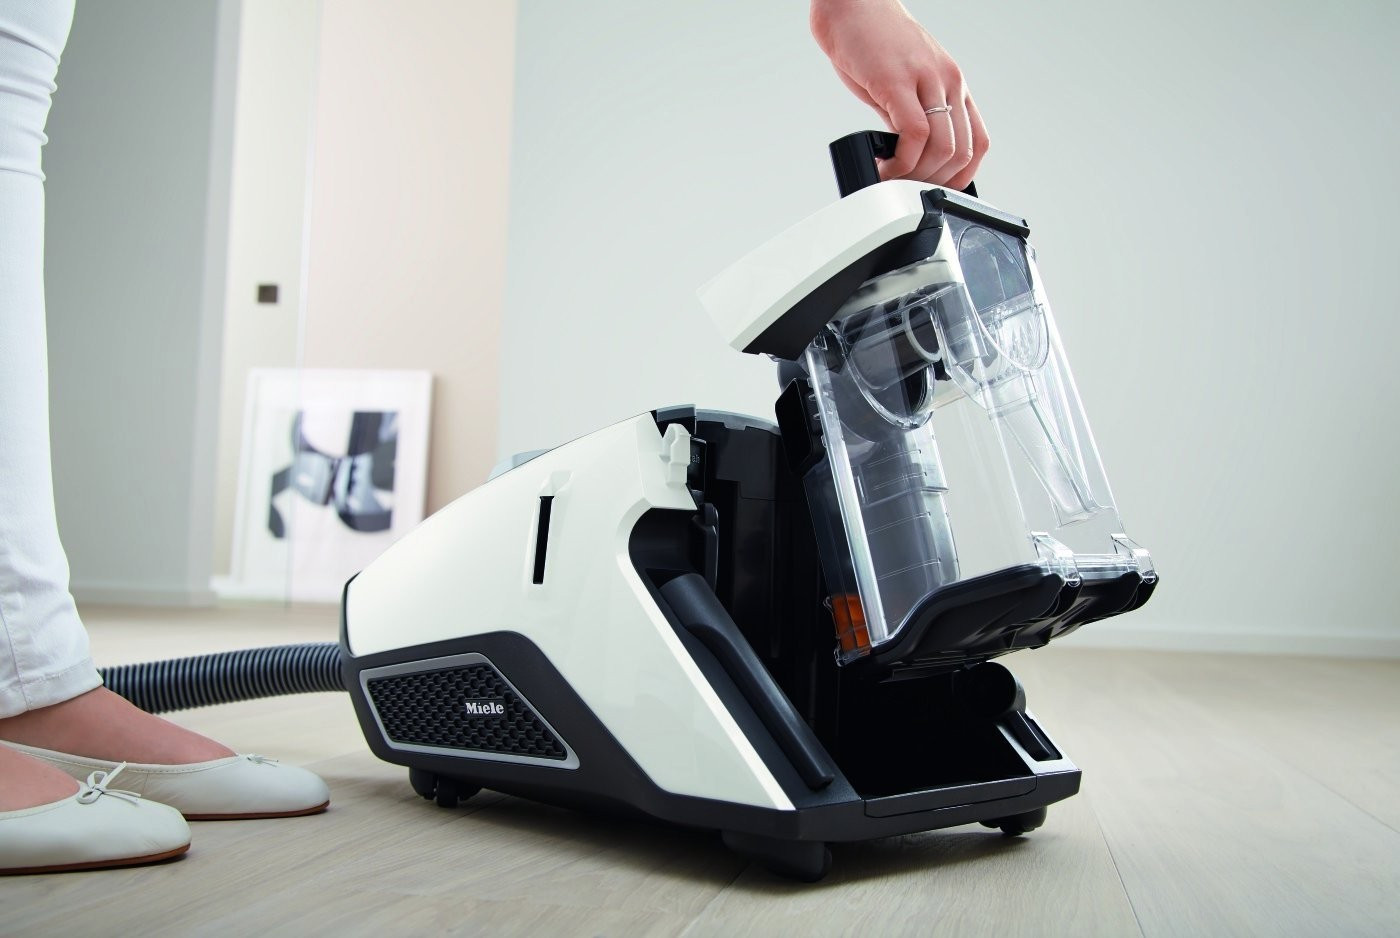 12 Ideal Miele Vacuum Cleaner for Hardwood Floors 2024 free download miele vacuum cleaner for hardwood floors of miele blizzard cx1 comfort powerline vacuum pertaining to 61gyg6l4cdl sl1400